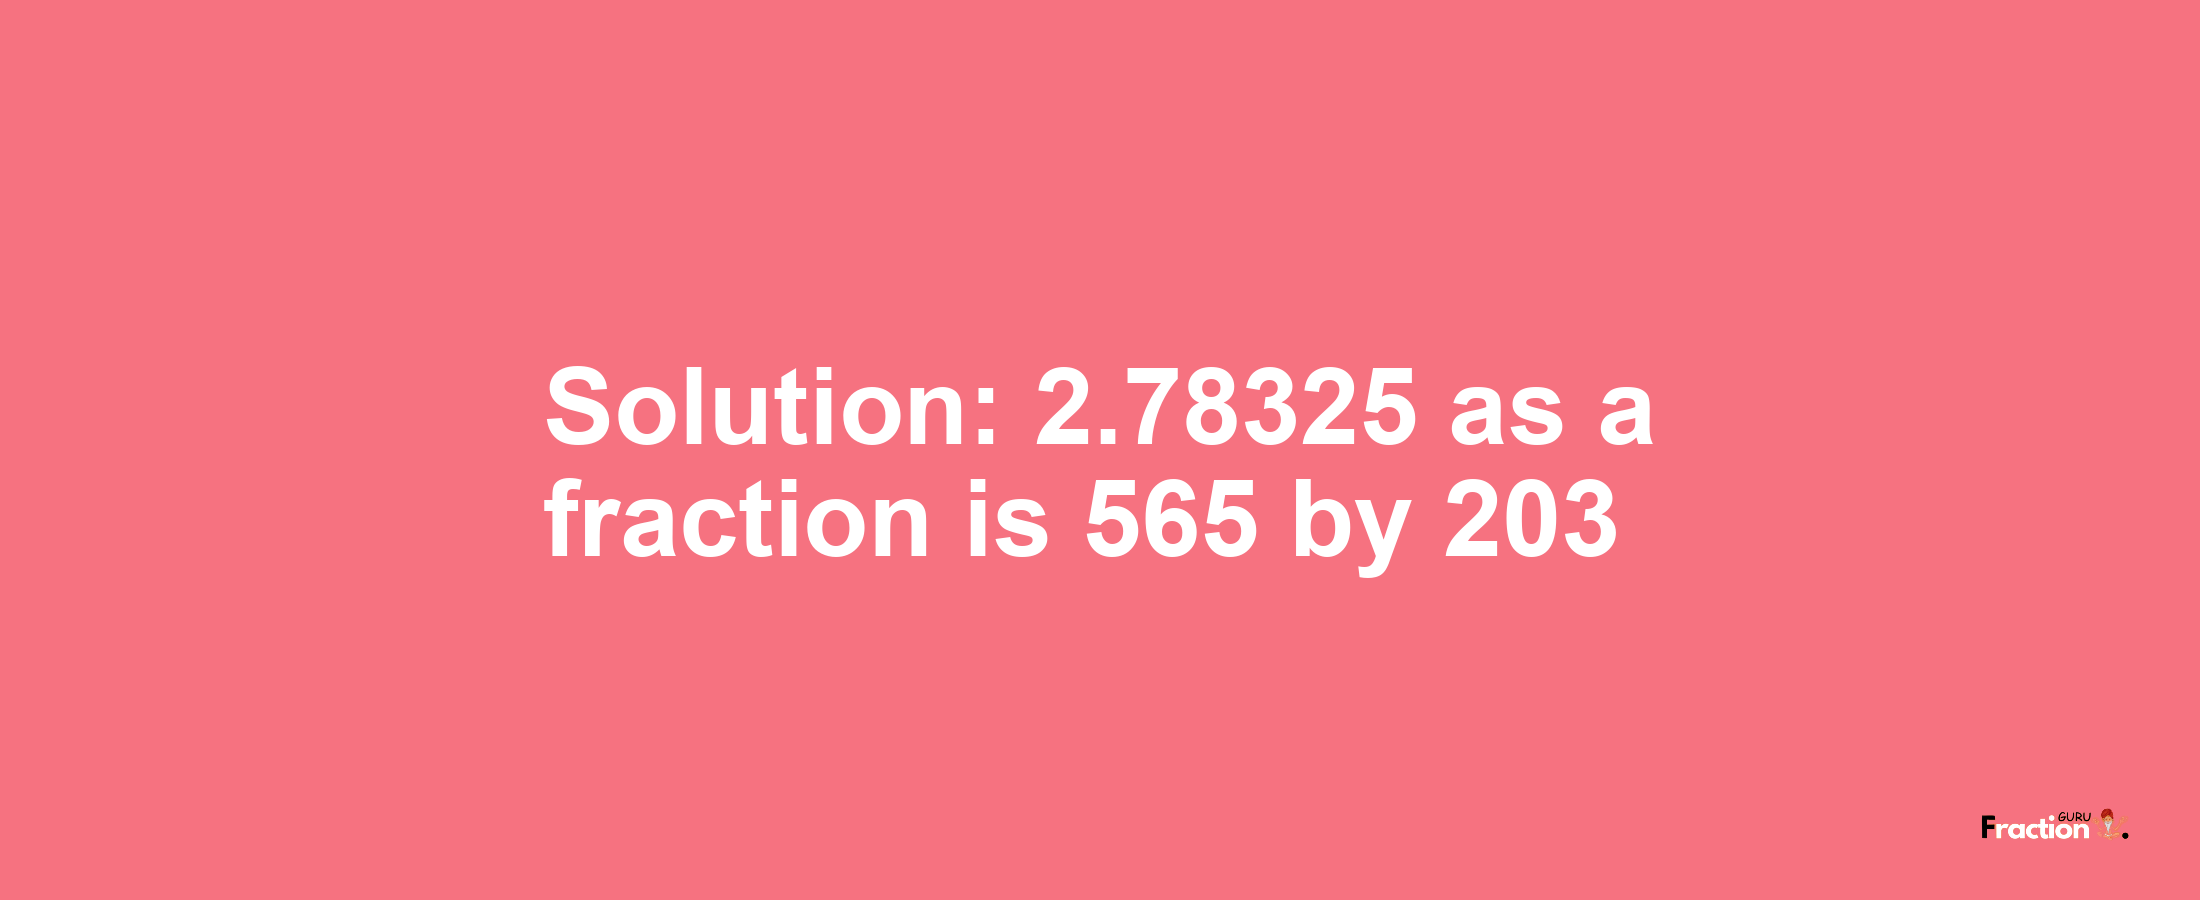 Solution:2.78325 as a fraction is 565/203